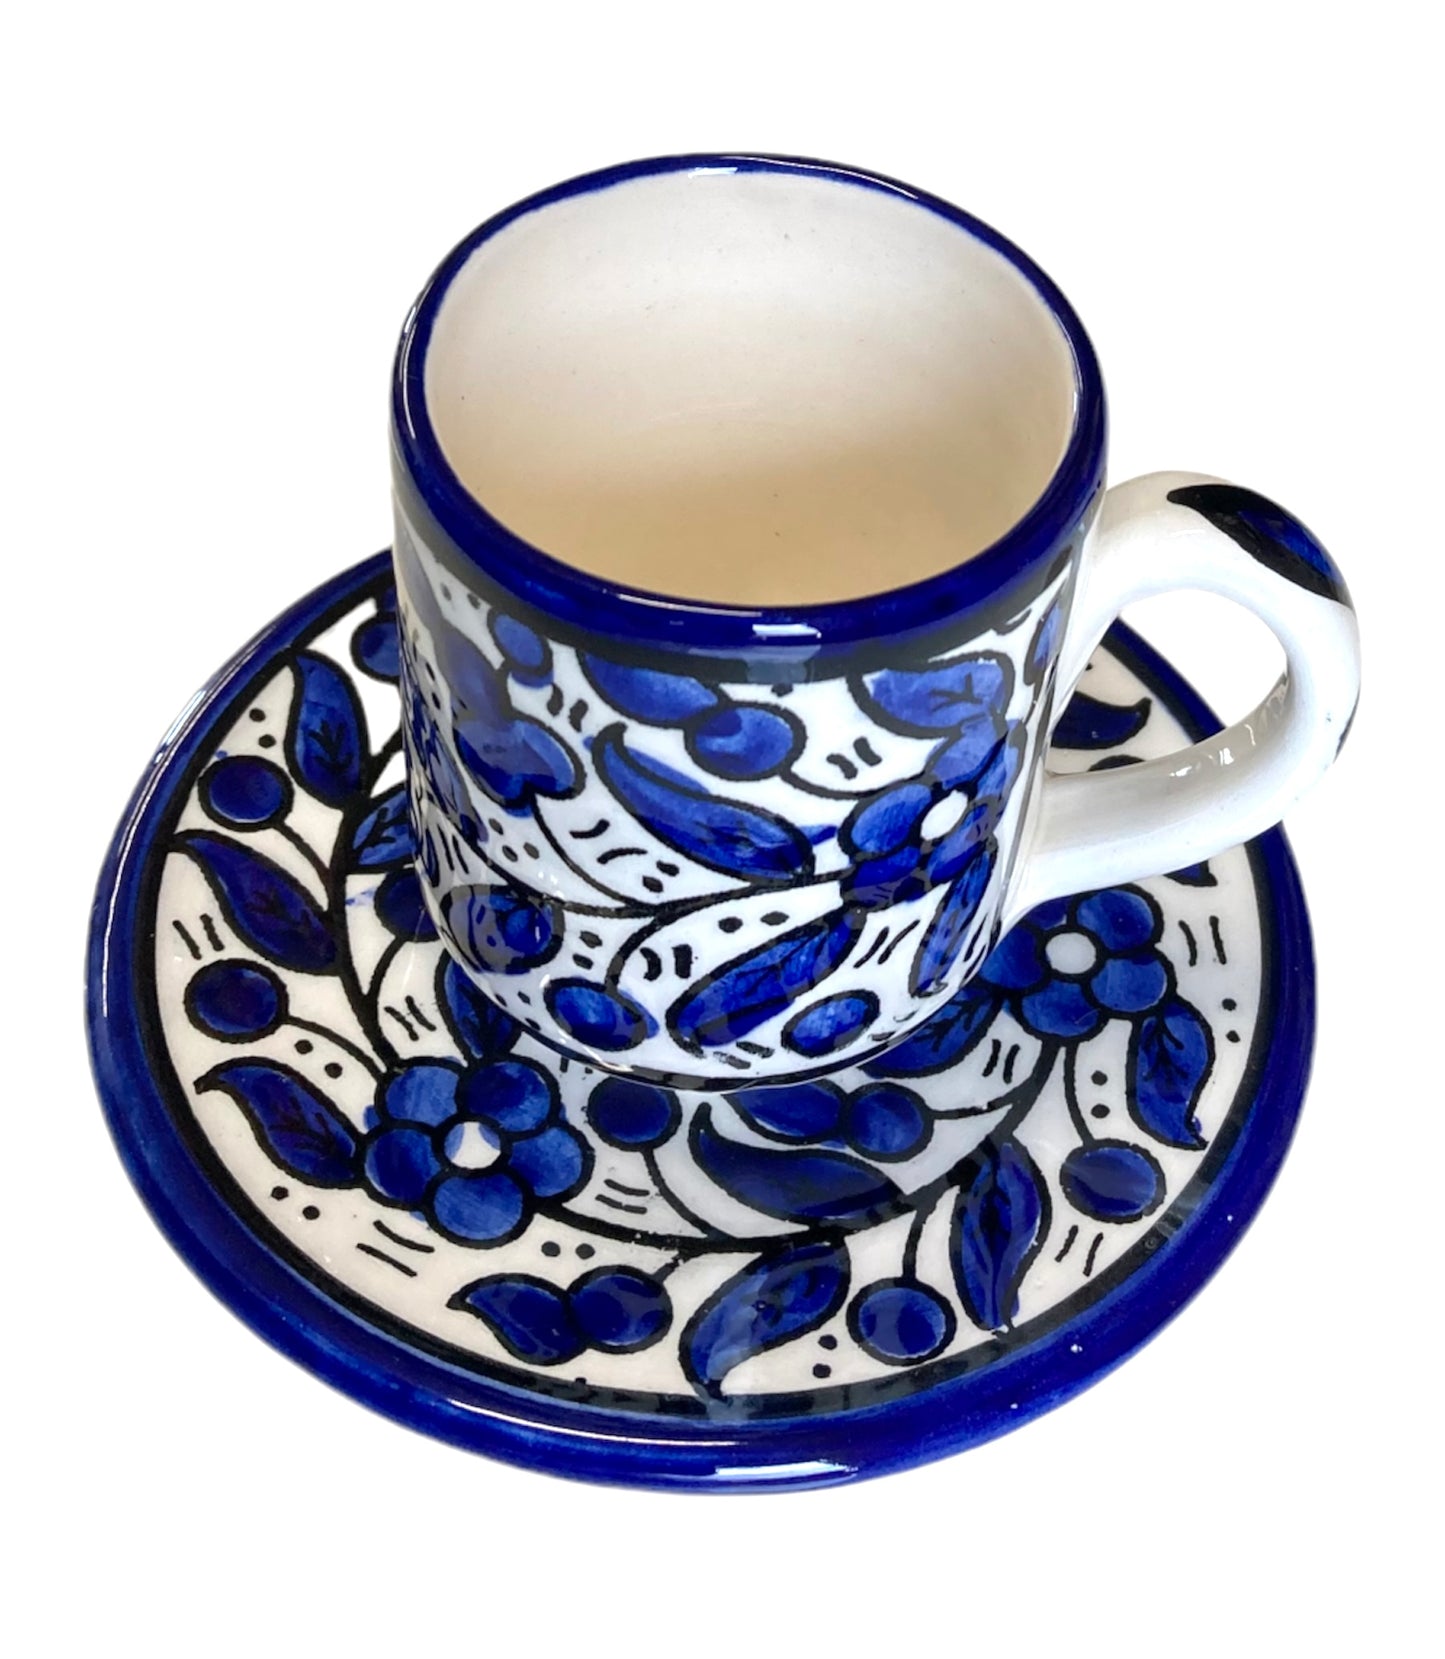 Hebron Ceramic Coffee Cup and Saucer